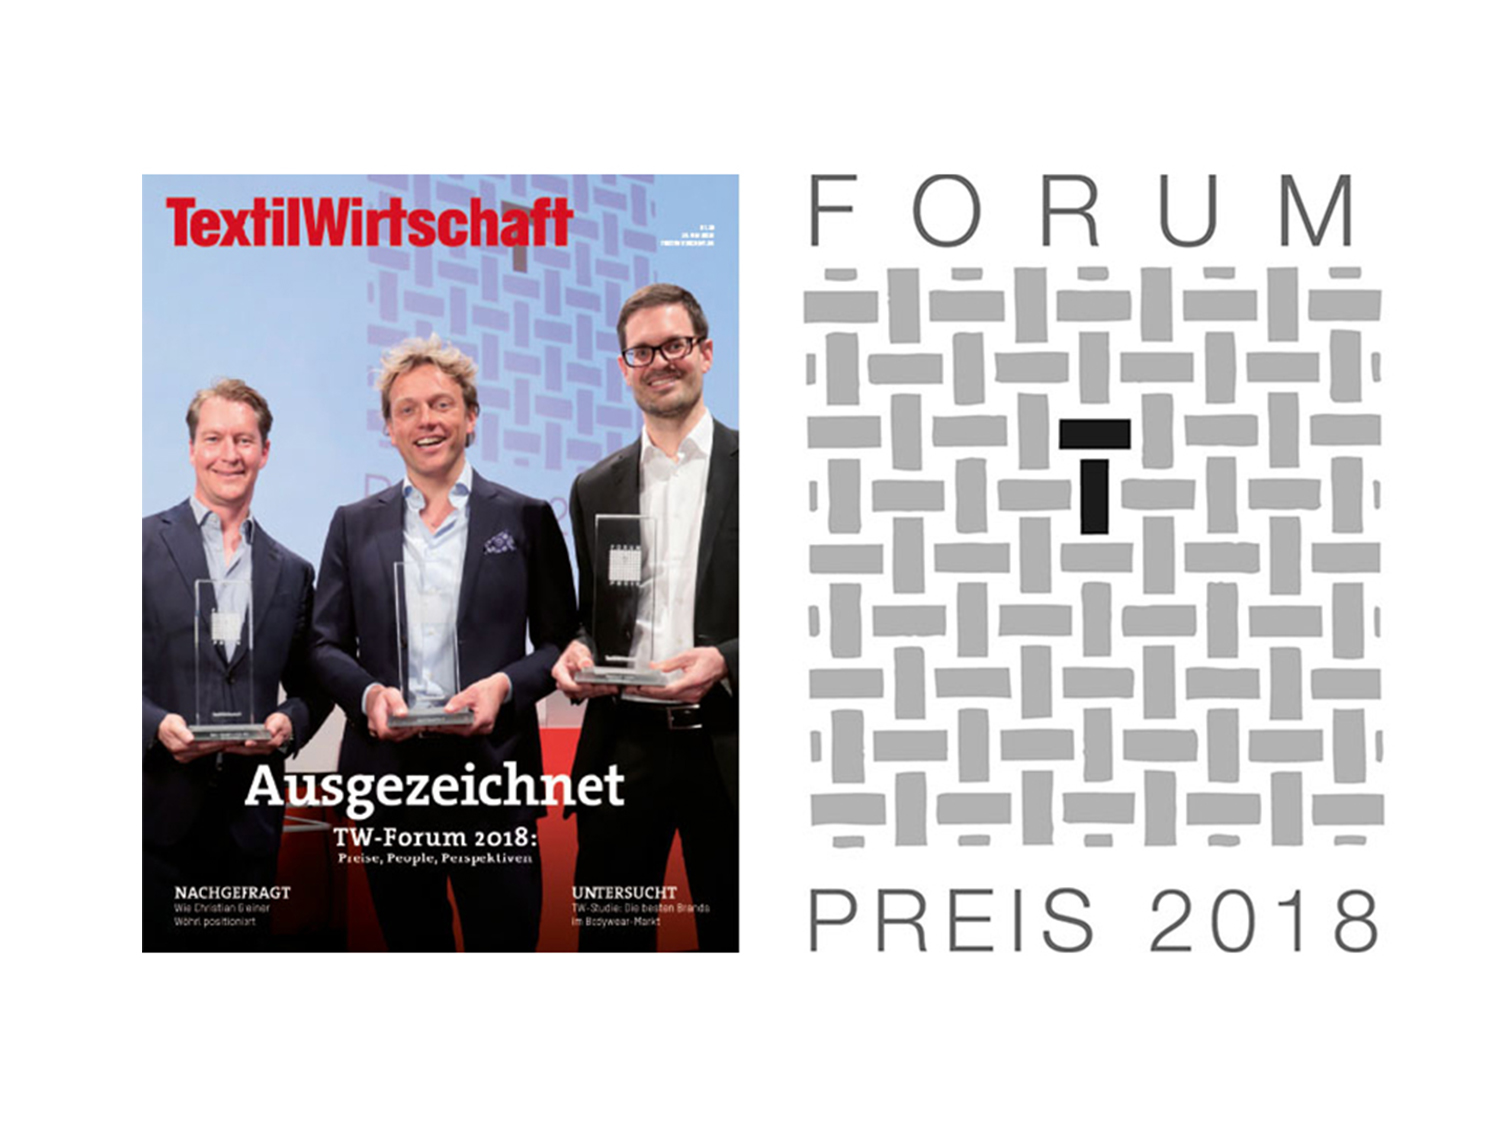 Cover of Textilwirtschaft magazine and the seal for the Forum-Preis, awarded to mey® in 2018| mey®